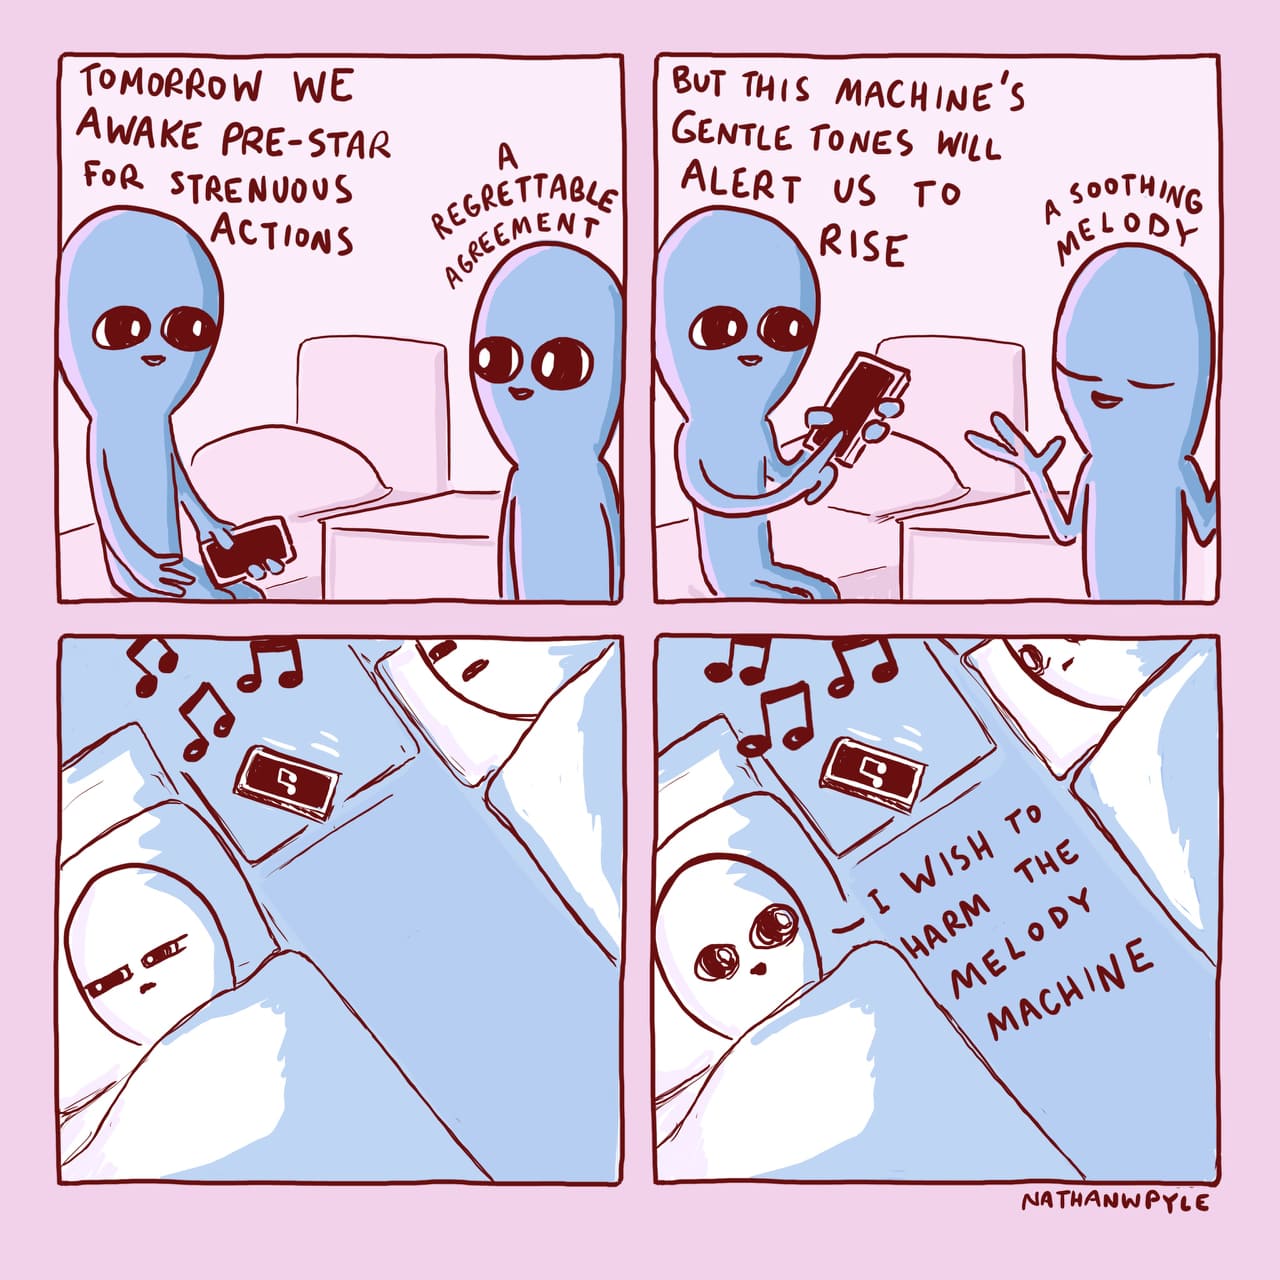 work meme - nathan pyle strange planet - Tomorrow We Awake PreStar For Strenuous Actions But This Machine'S Gentle Tones Will Alert Us To Irise Grettable Soothing Regreto Cement Elodi A Green . The L'I Wish To Tharm | Melody Machine Nathanwpyle